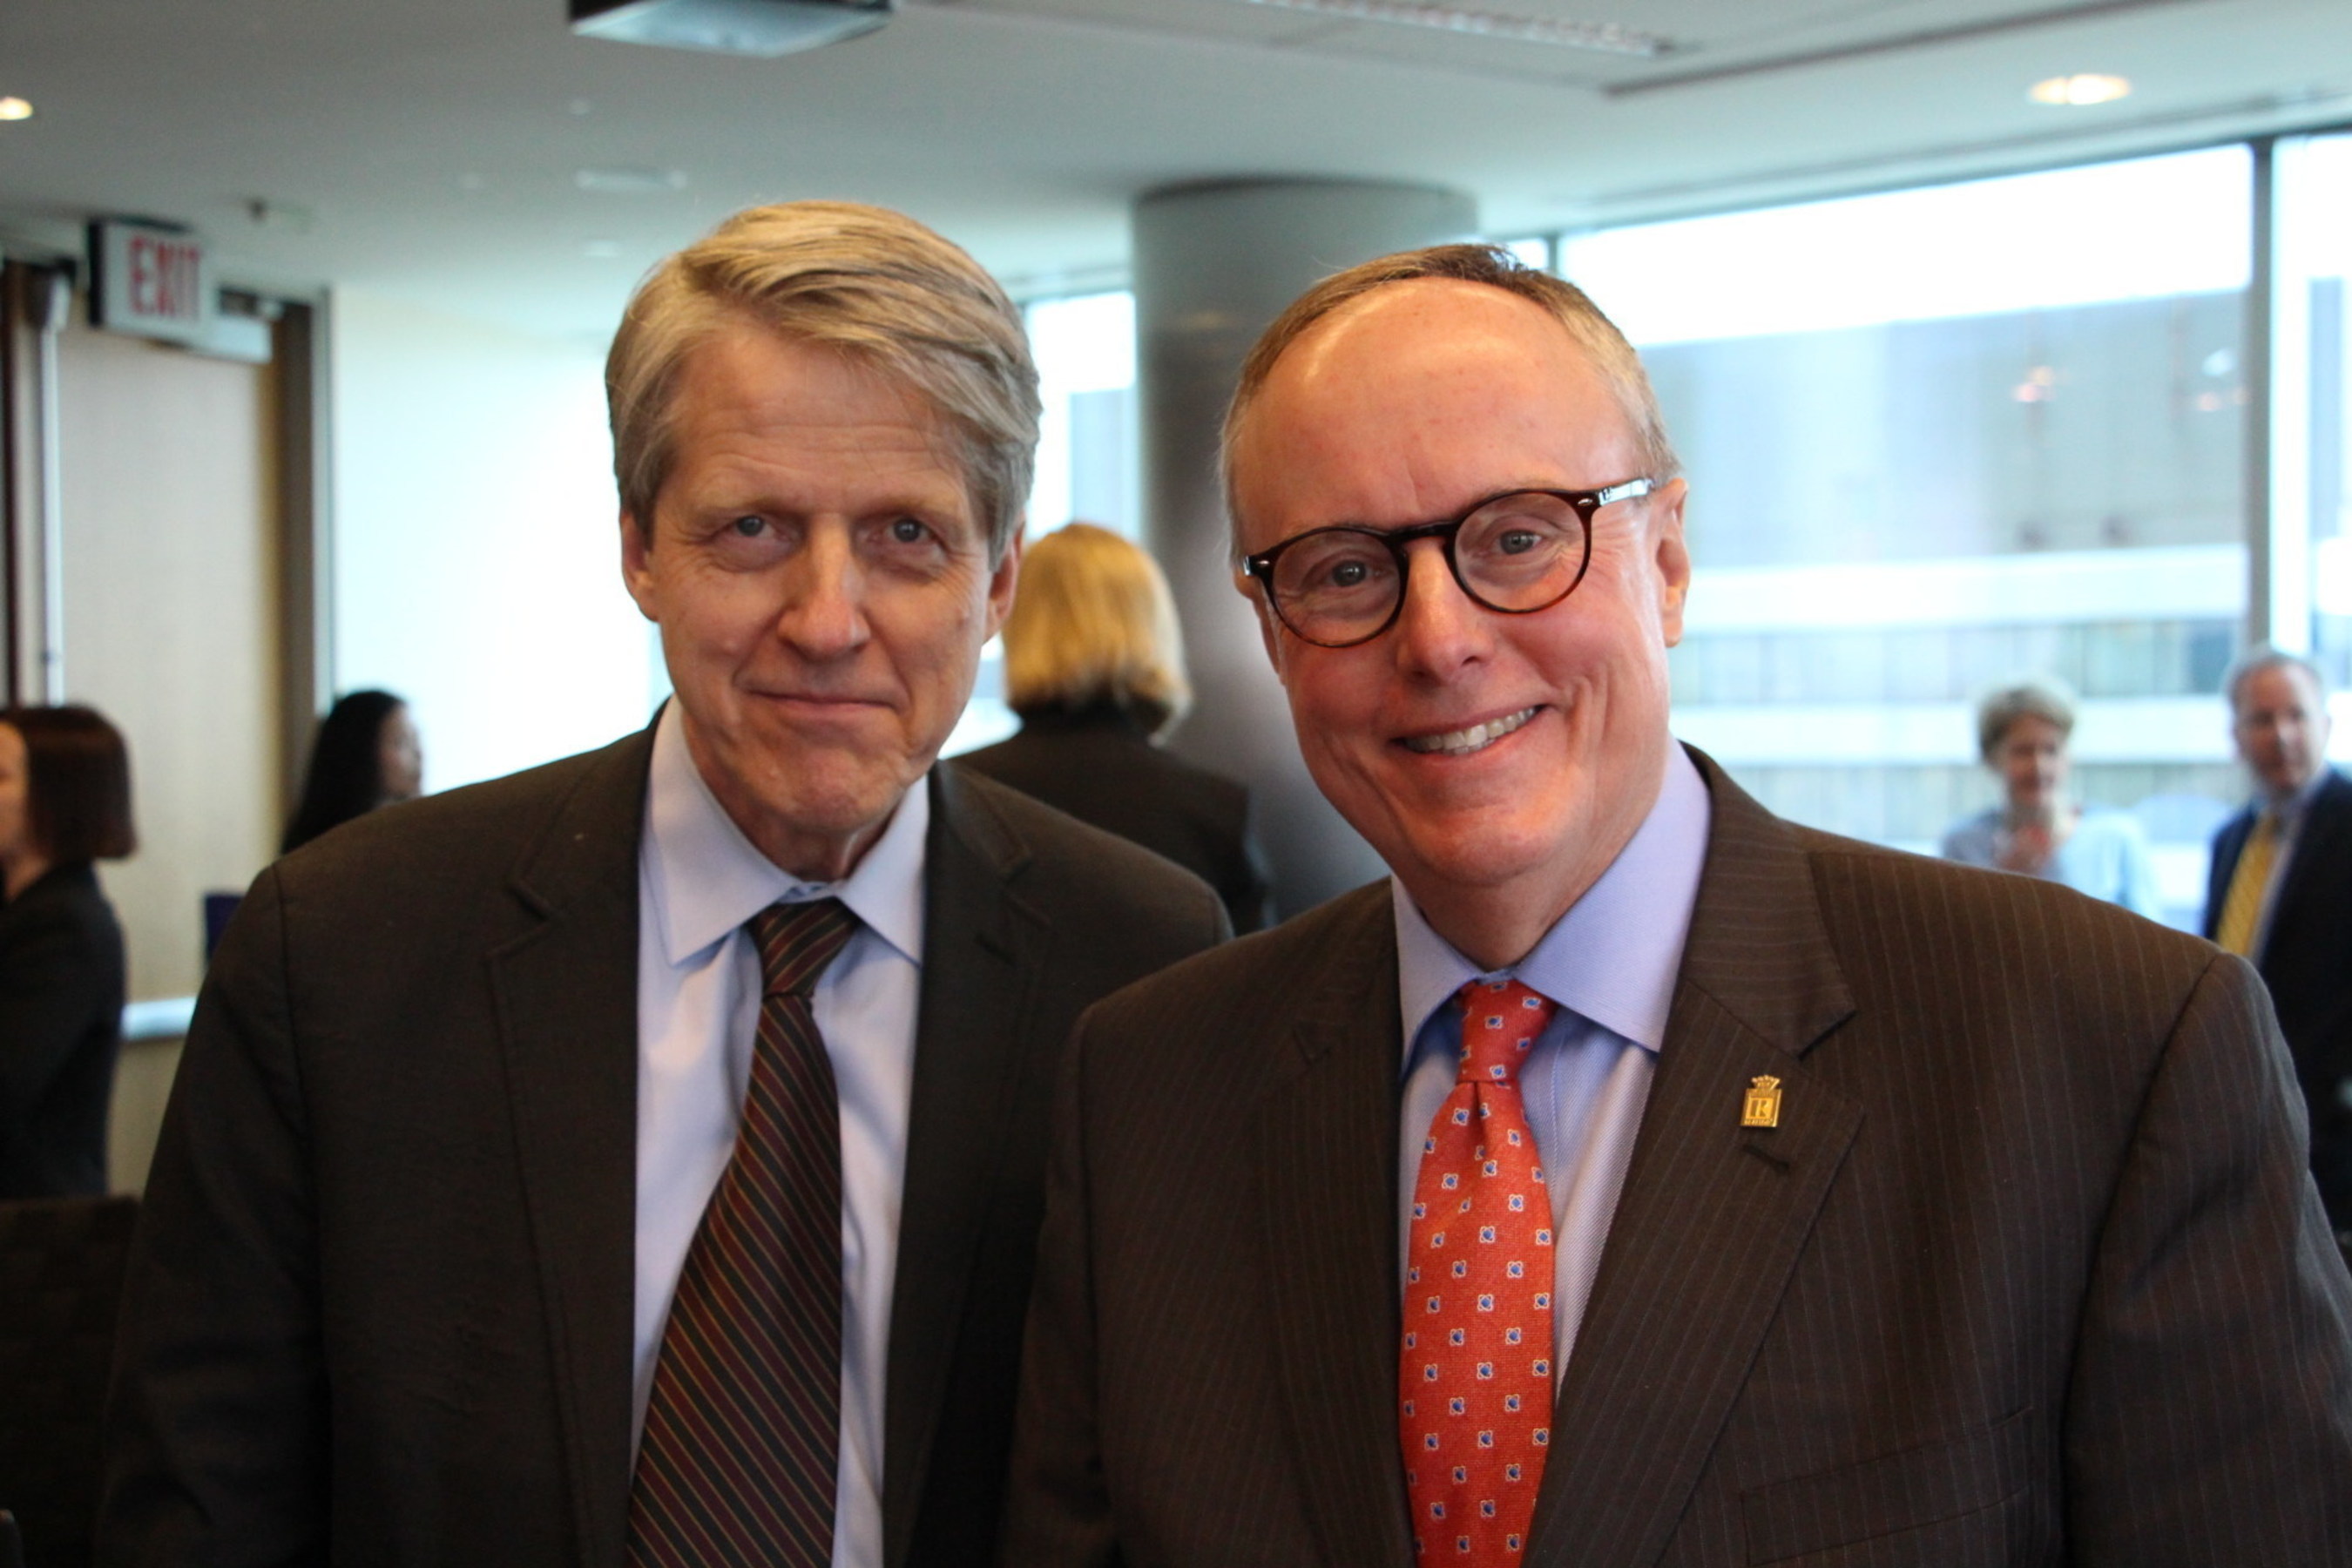 NAR Immediate Past President Steve Brown joins American Nobel Laureate Dr. Robert Shiller at an economic and policy forum today to appraise the state of the U.S. housing market.